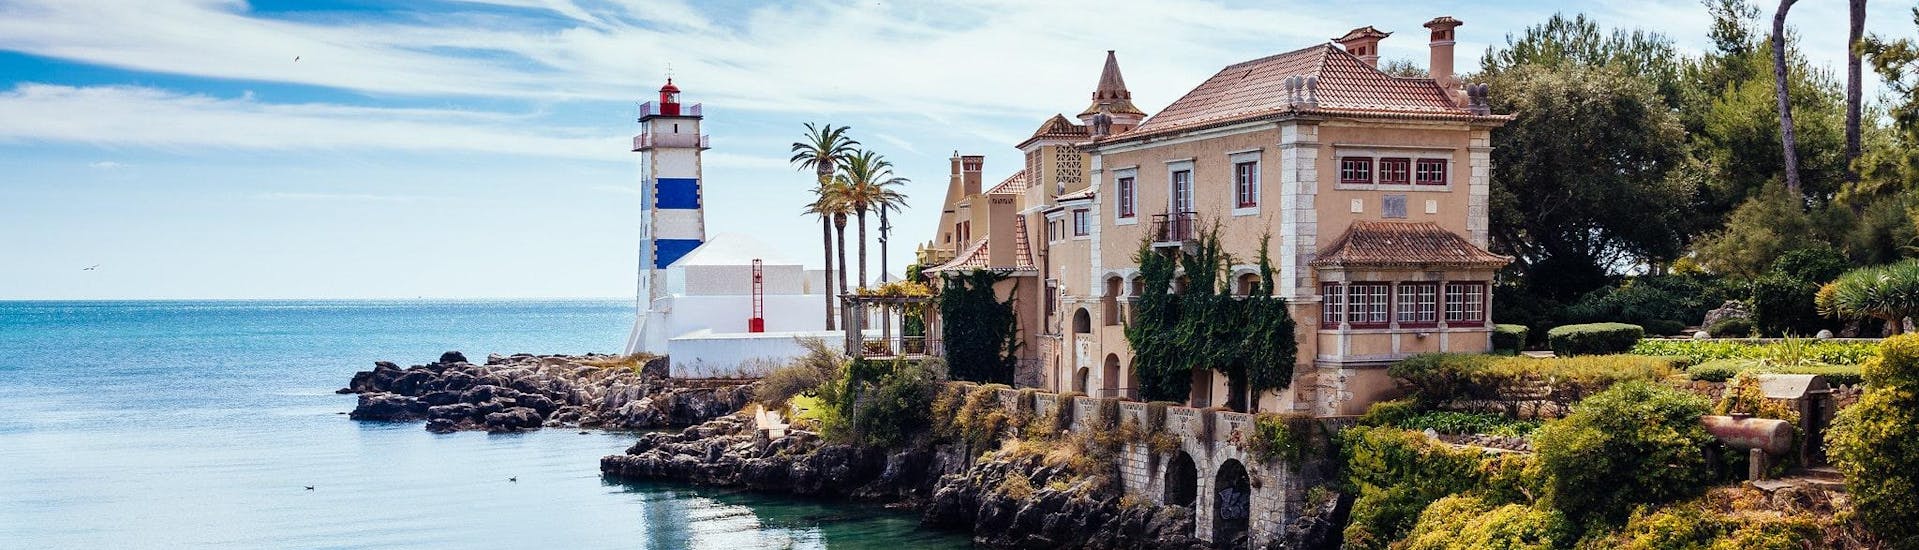 The Santa Marta Lighthouse and Museum in Cascais, where many boat trips along the coast of Portugal start.